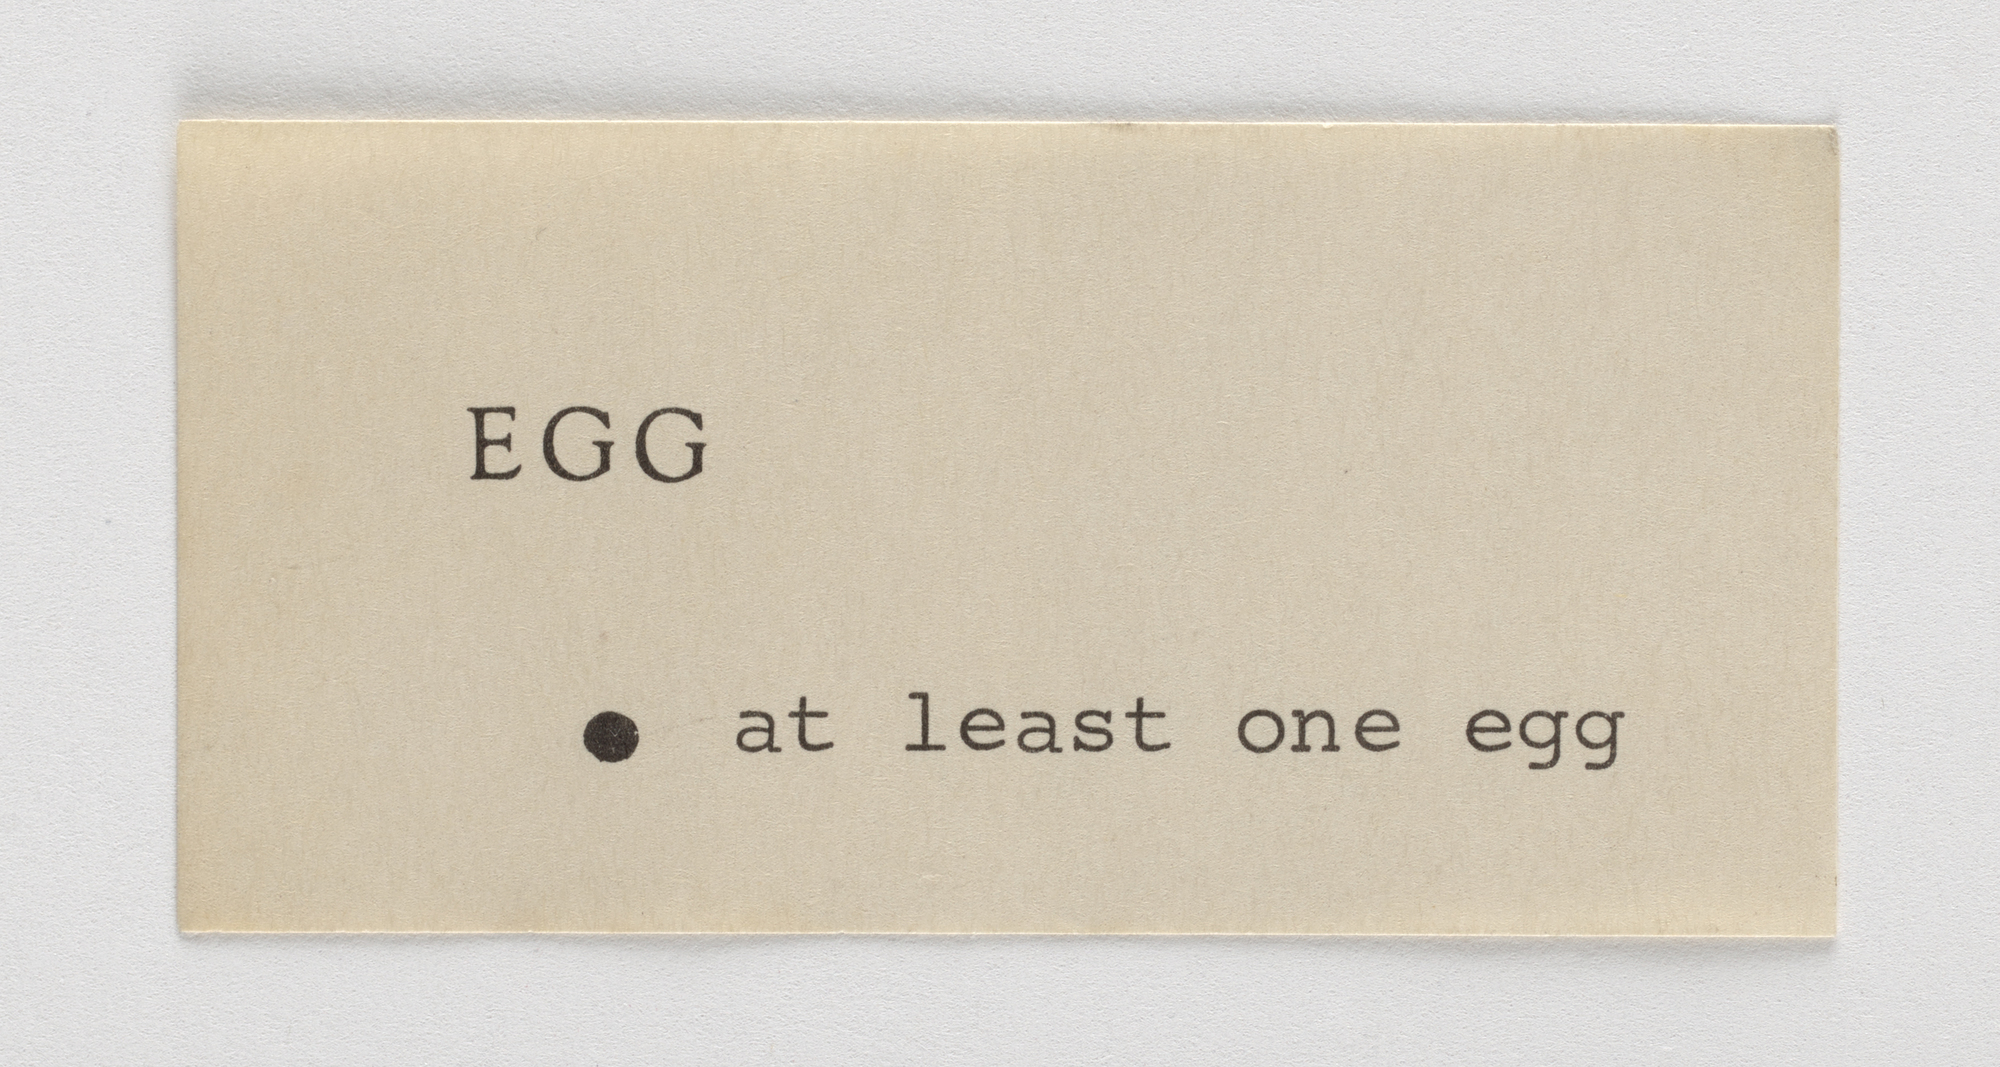 A rectangular piece of paper with the text “EGG” and “at least one egg” printed on it